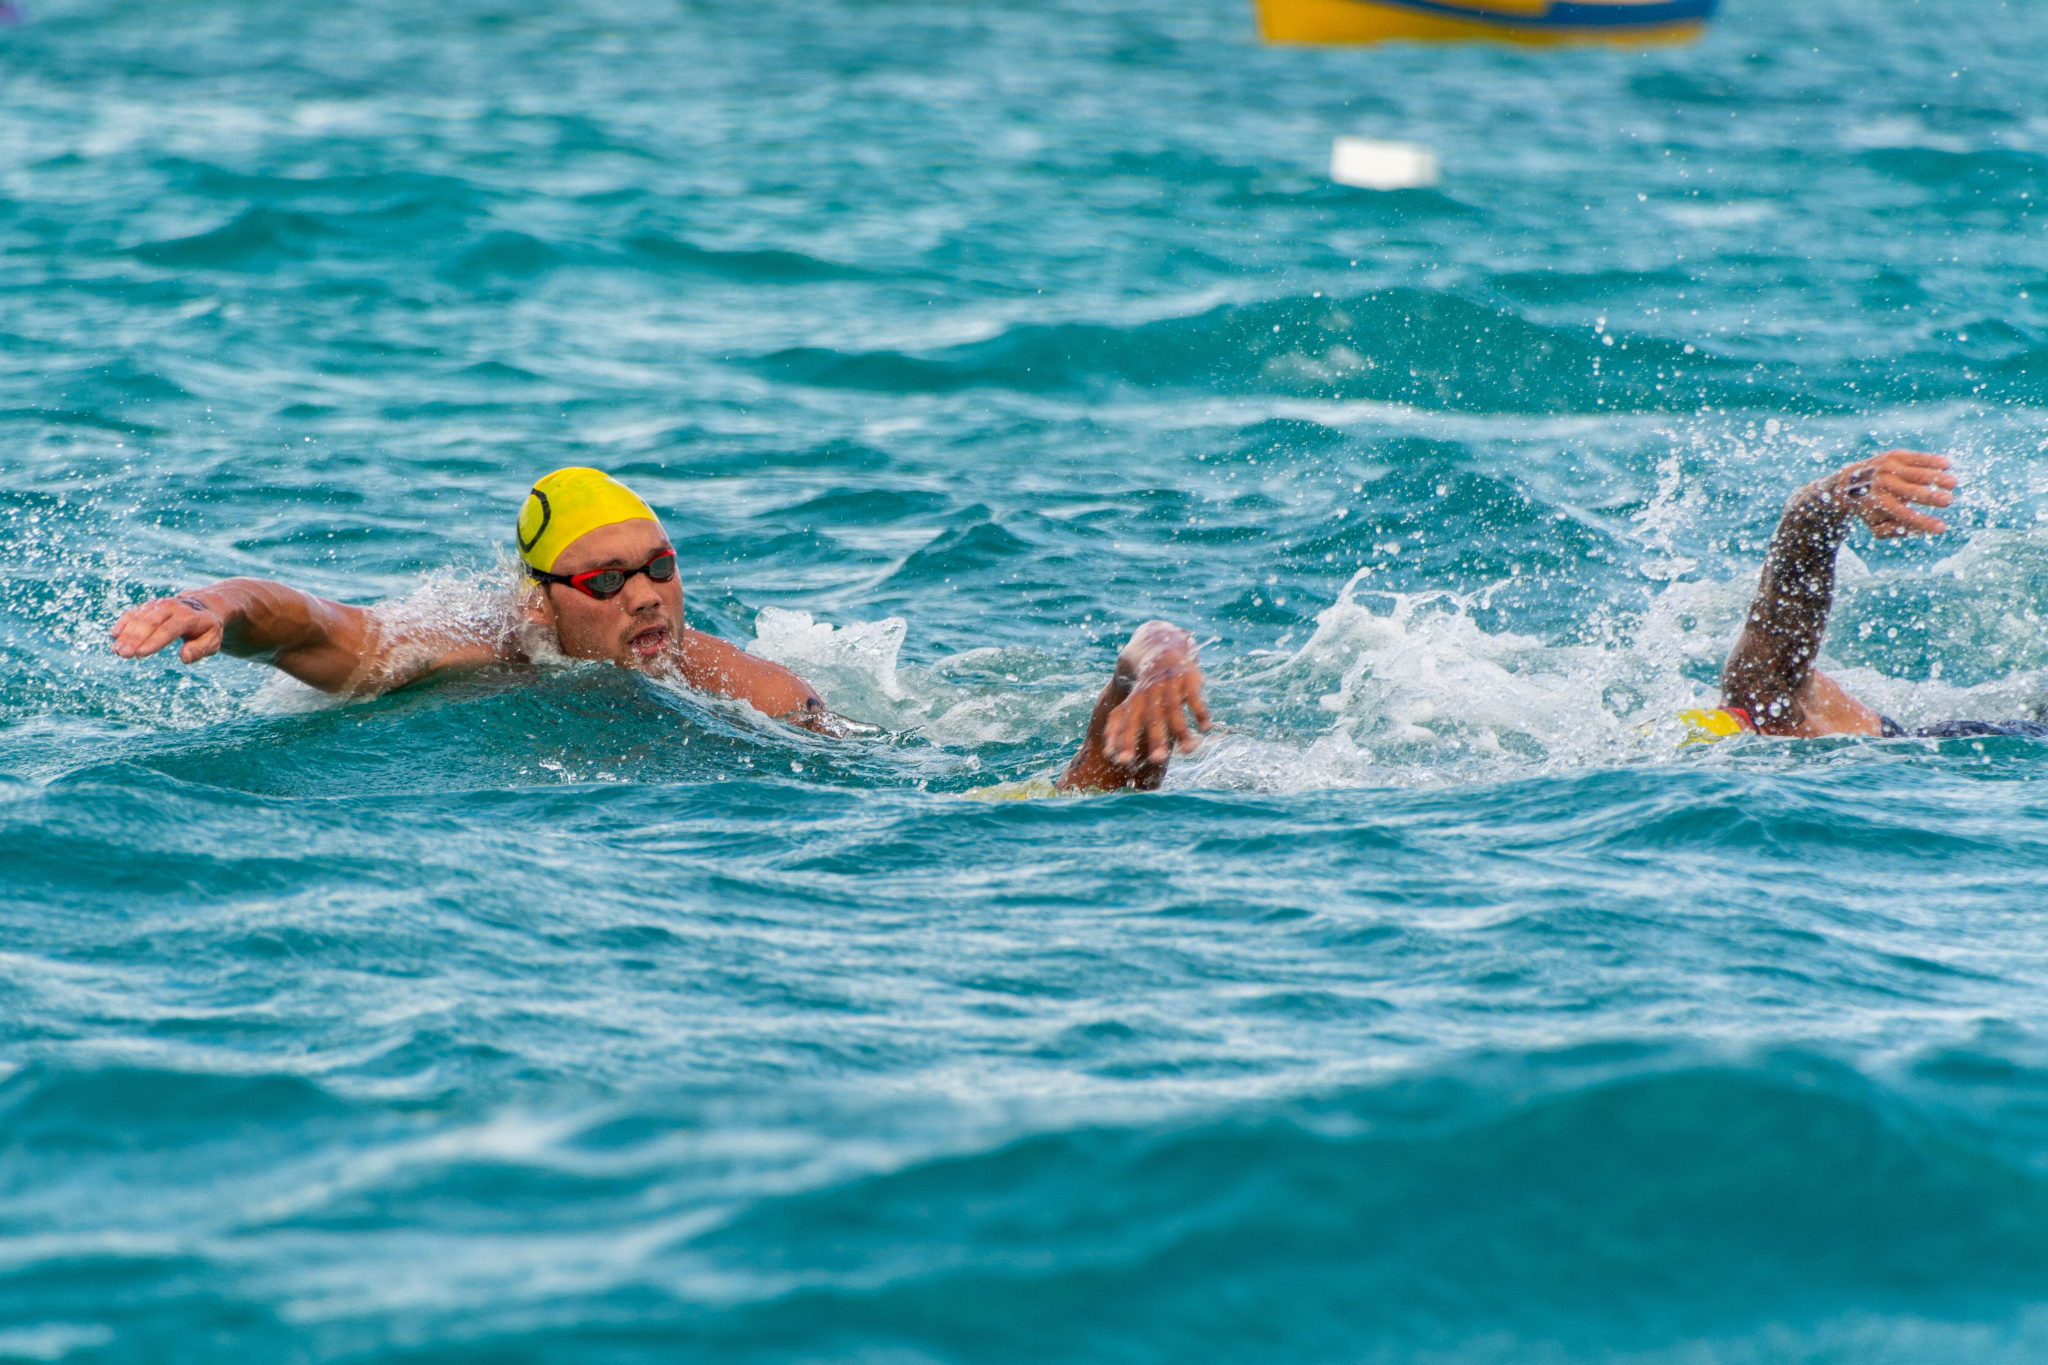 Tahiti and New Caledonia earn open water titles as first Samoa 2019 medals claimed